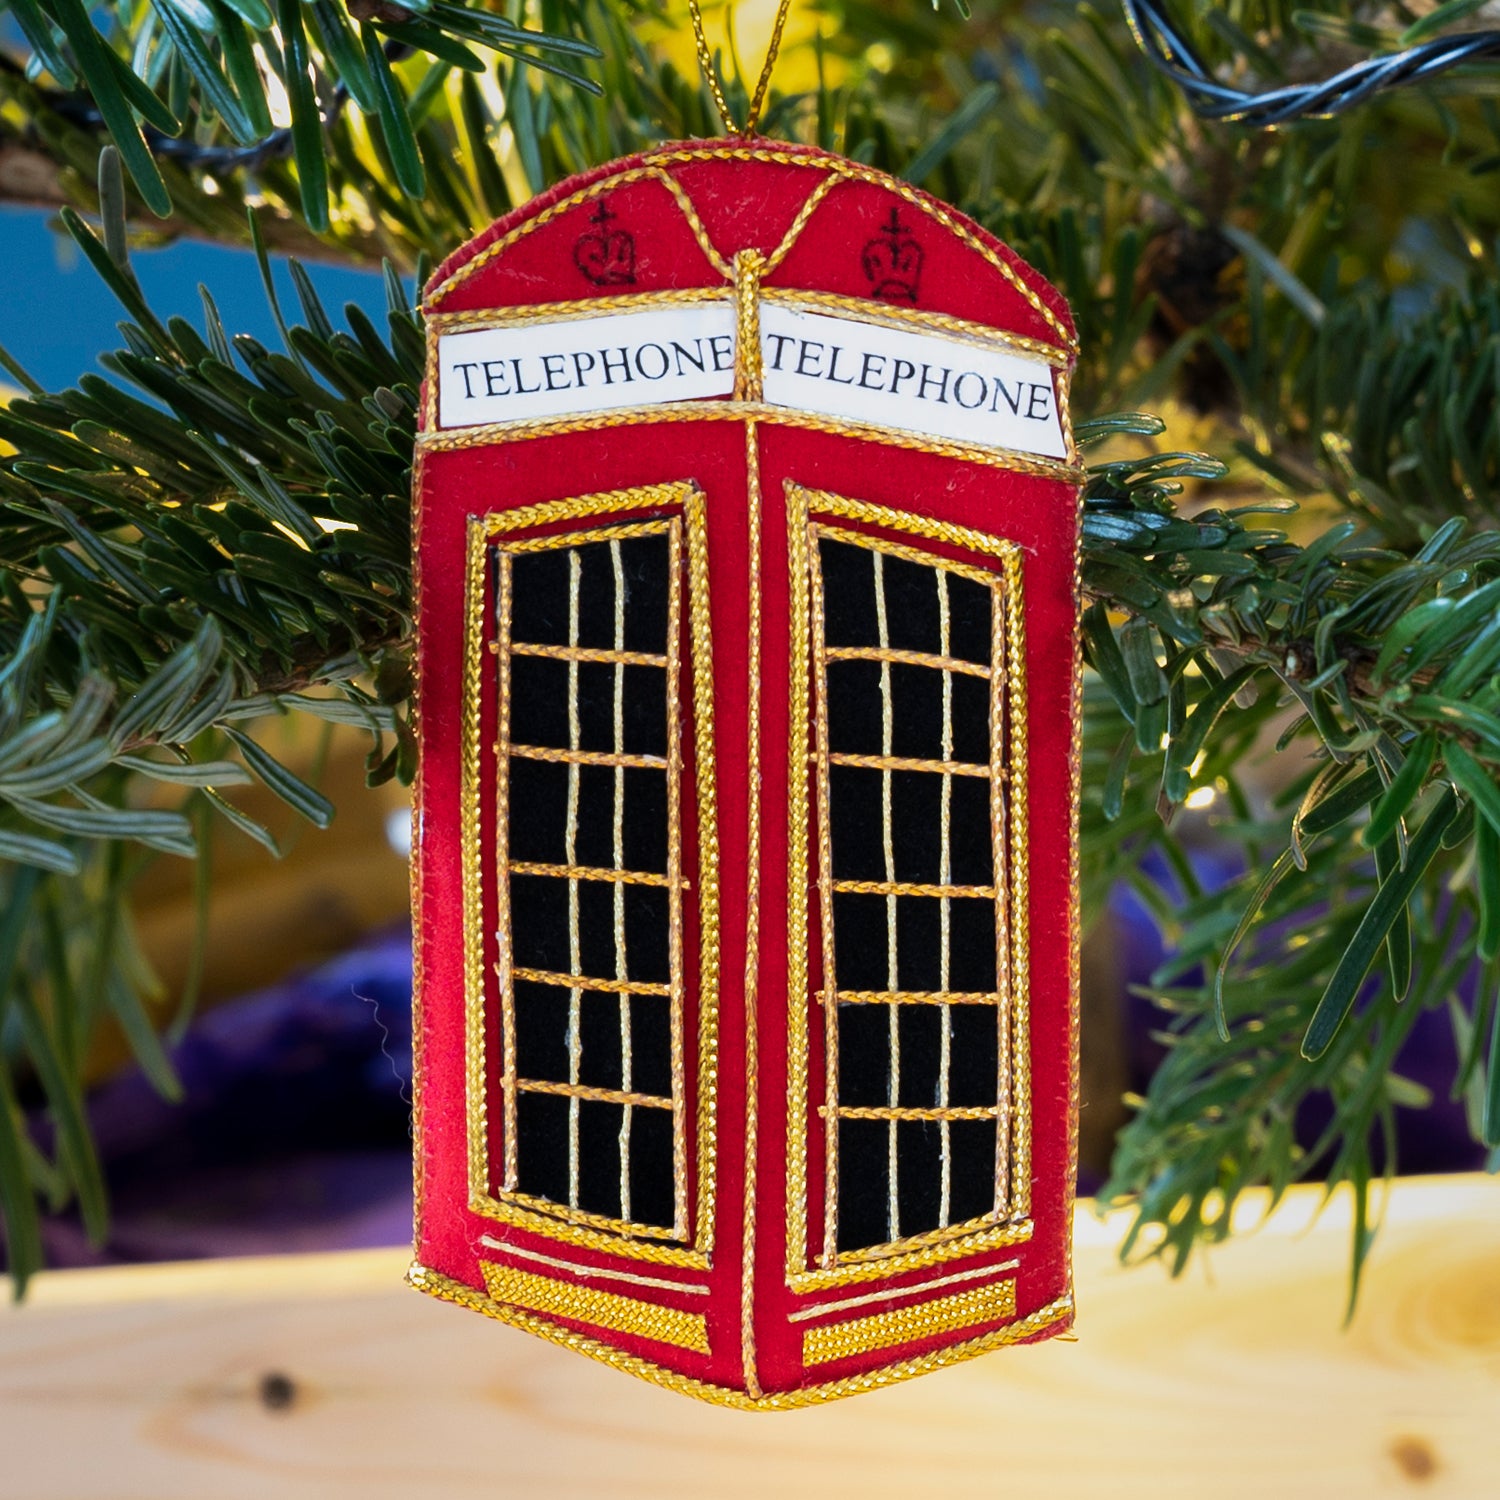 Stitched phonebox decoration hanging from Christmas tree